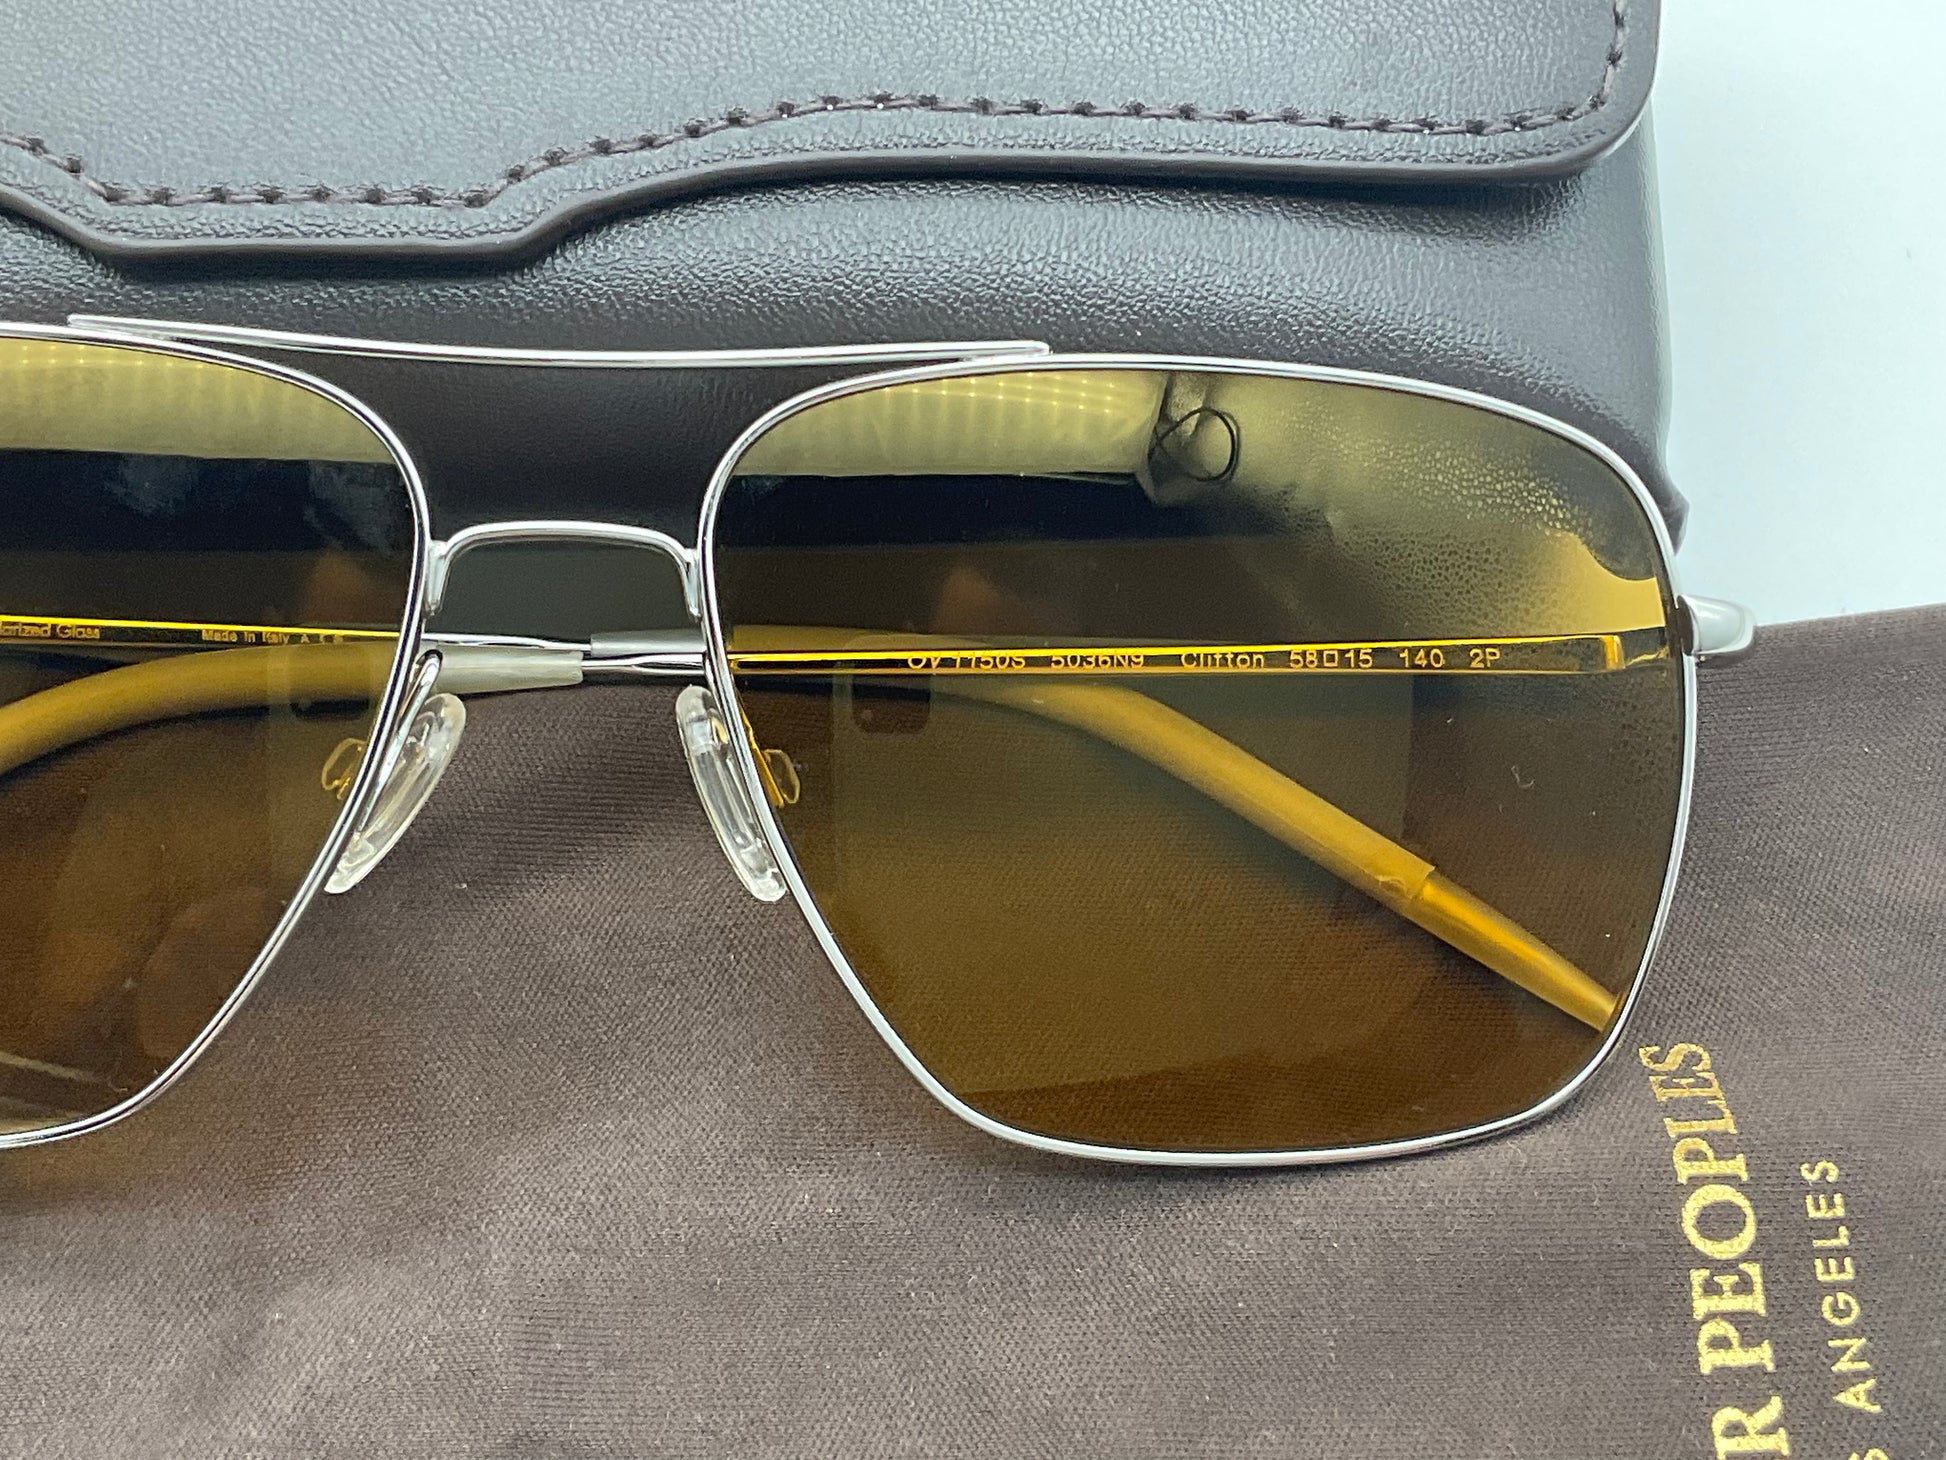 Oliver Peoples Clifton Silver 58mm Amber Brown Polar – Shade Review Store